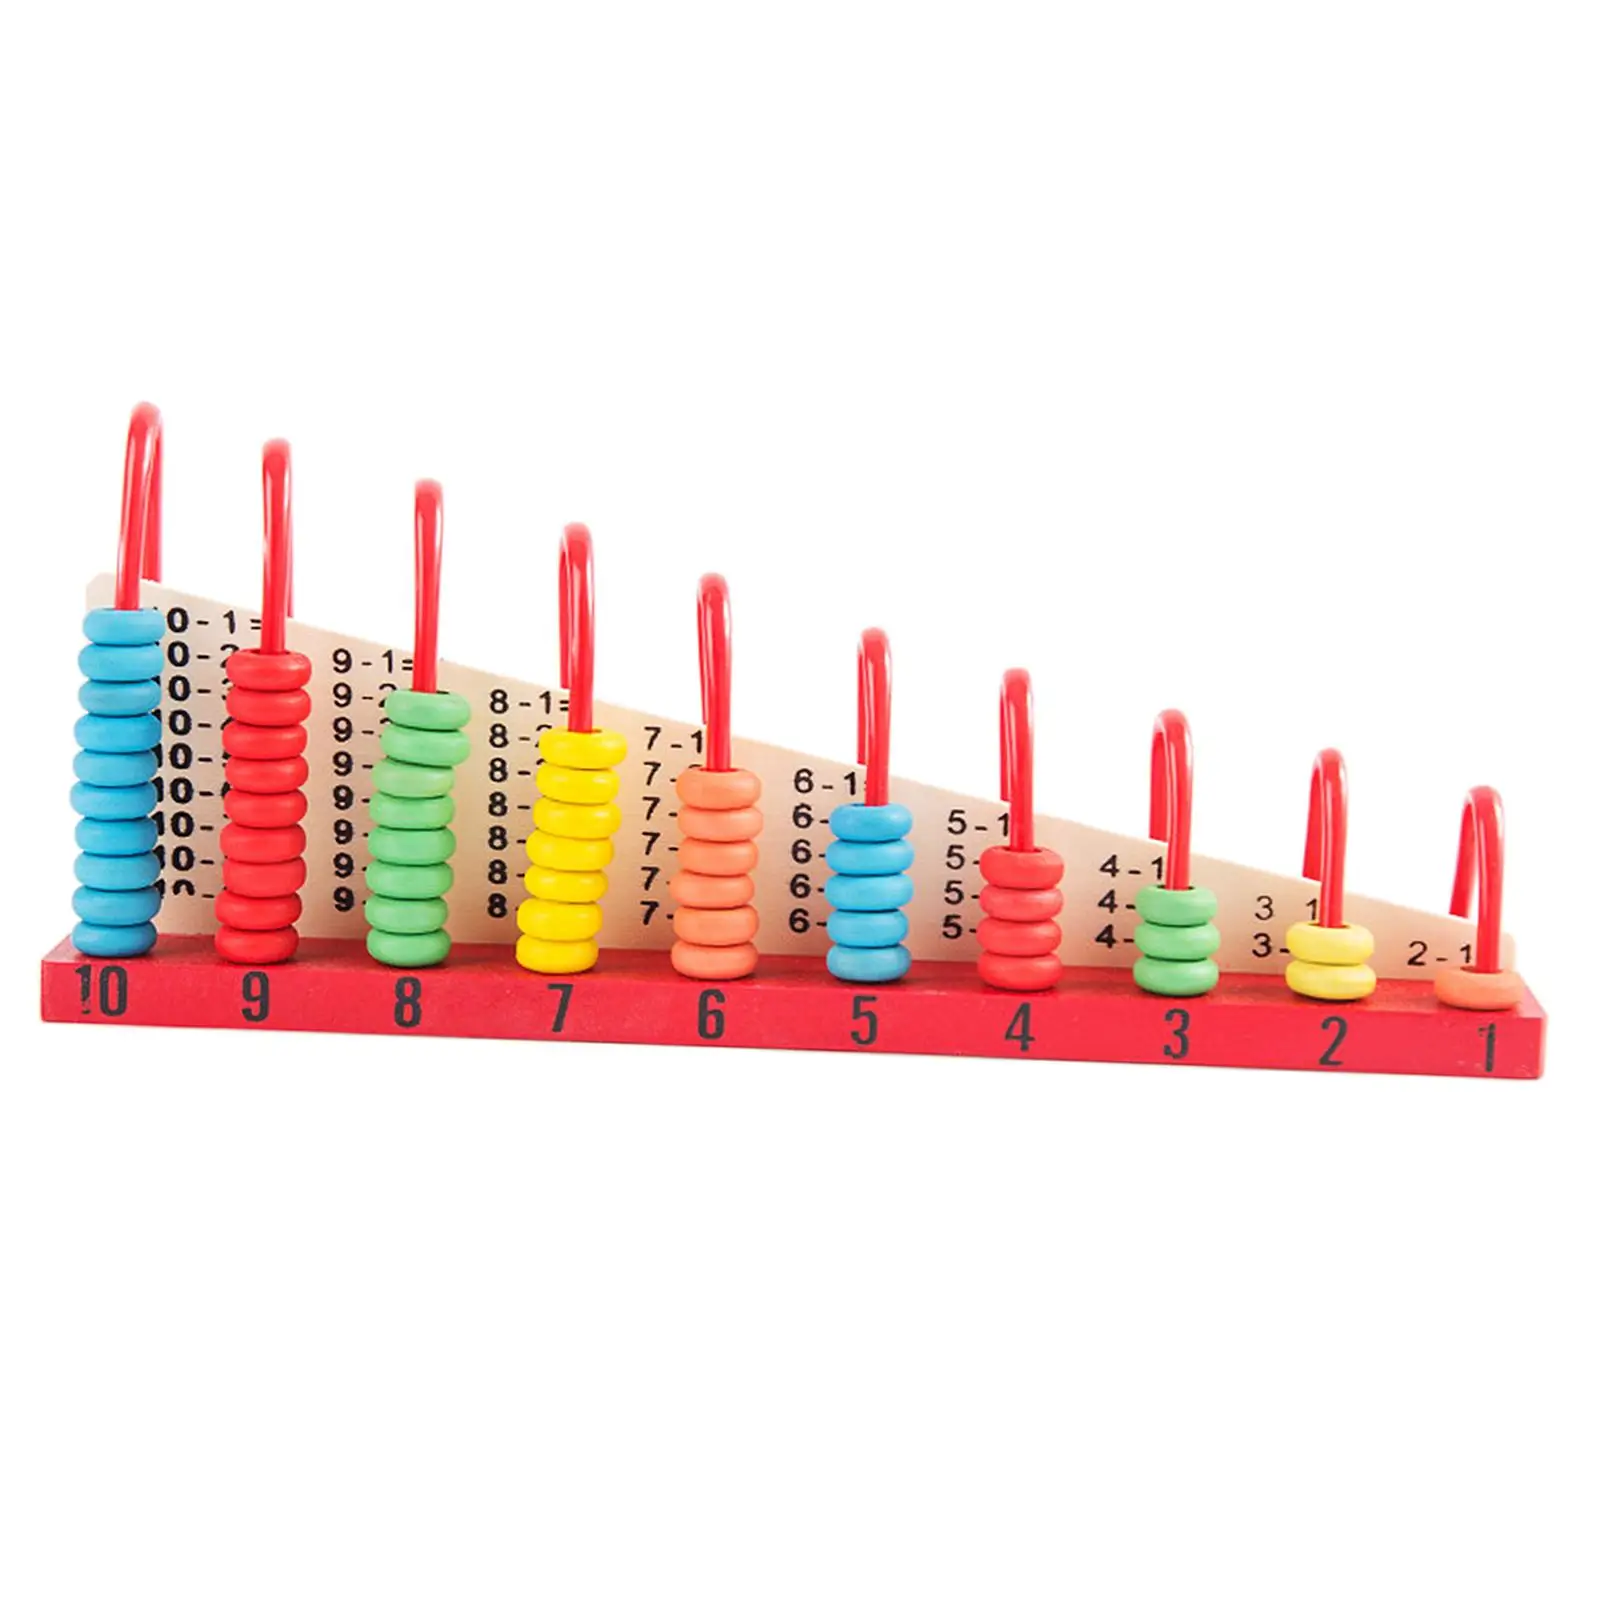 Add Subtract Abacus Colorful Activity Games Early Learning Math Teaching Tool for Kindergarten Kids Baby Toddlers Boys Girls